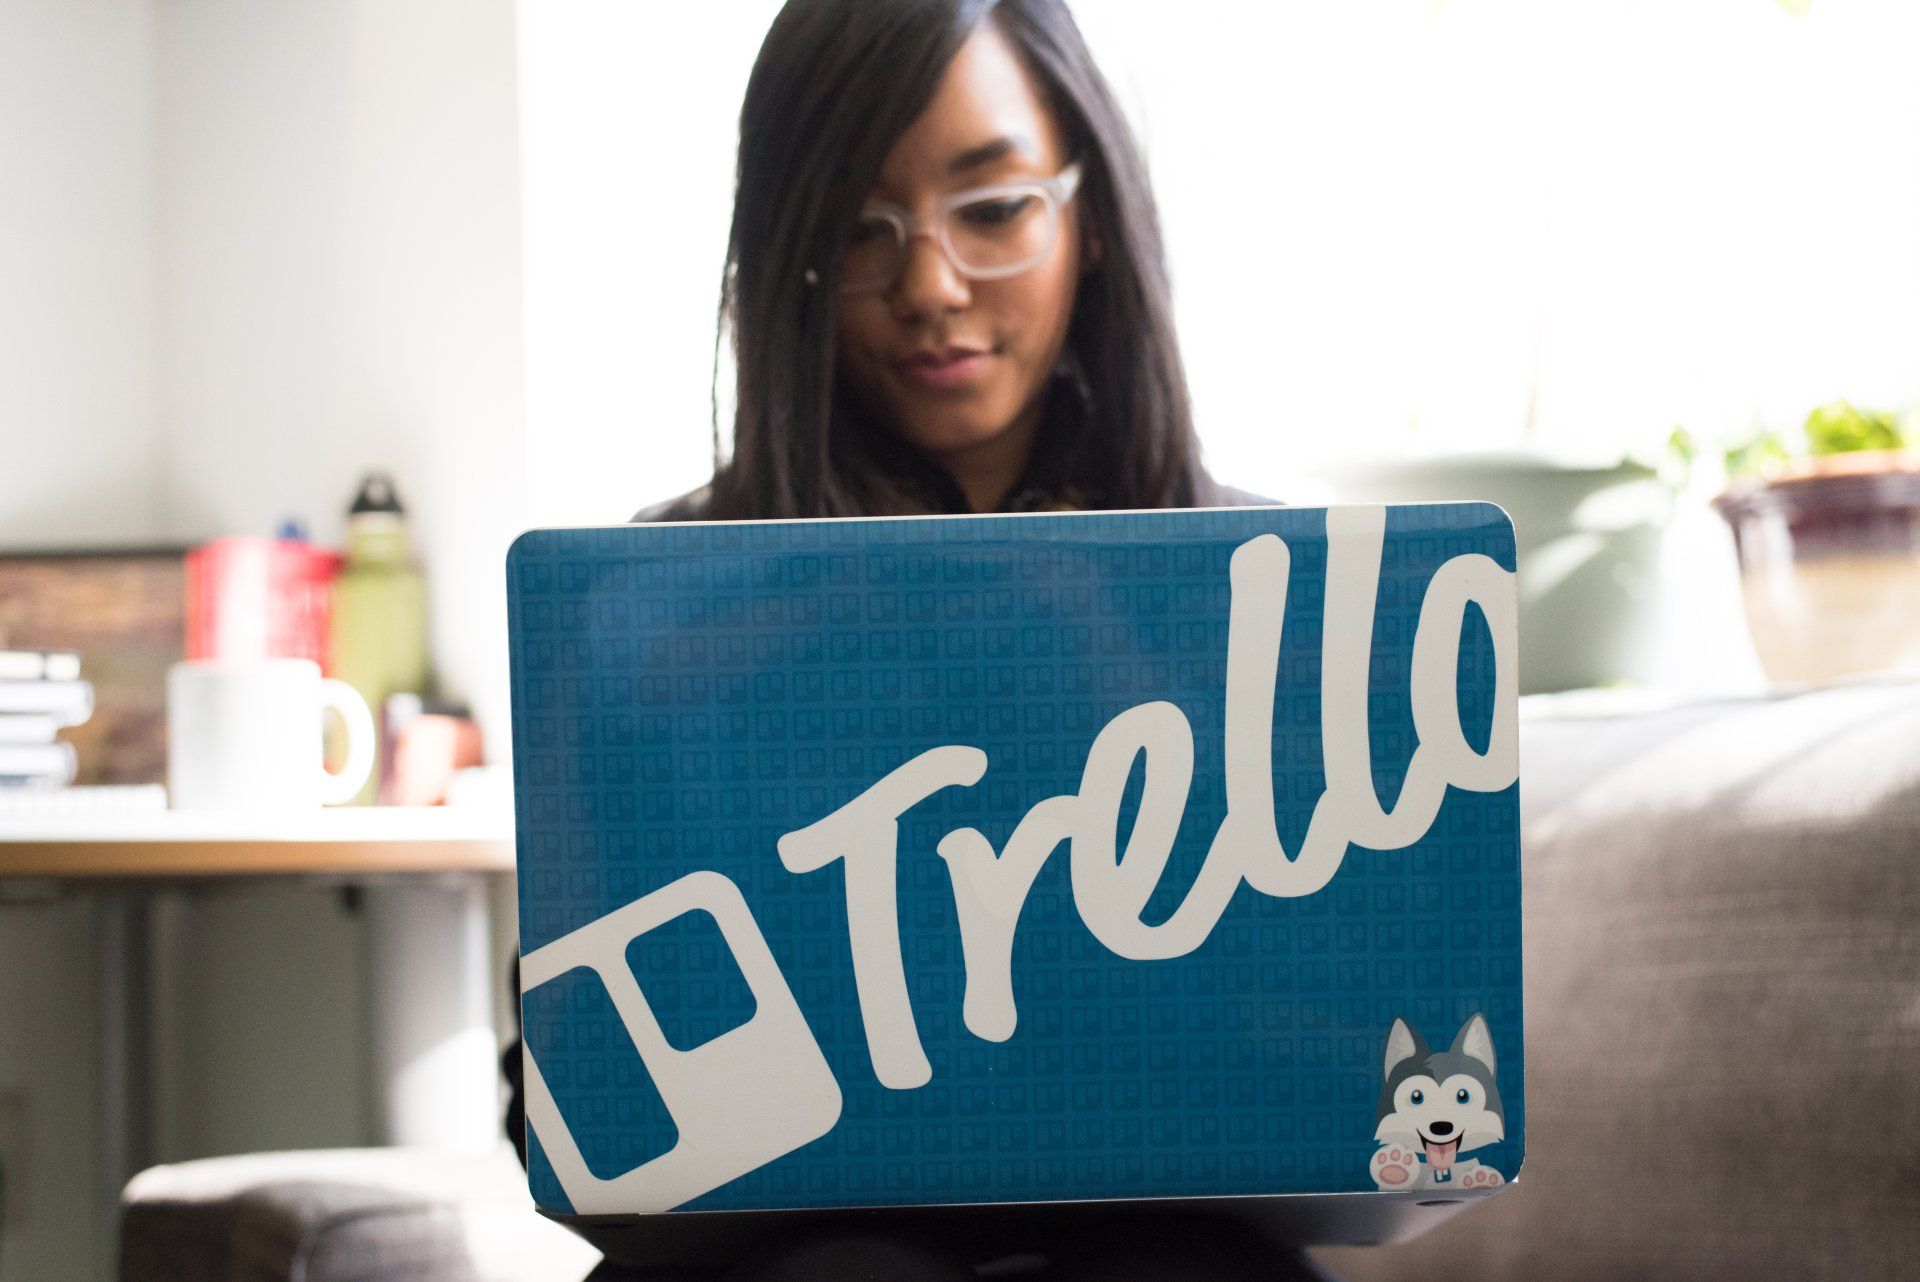 Trello is my go-to app for planning social media content and storing content ideas.